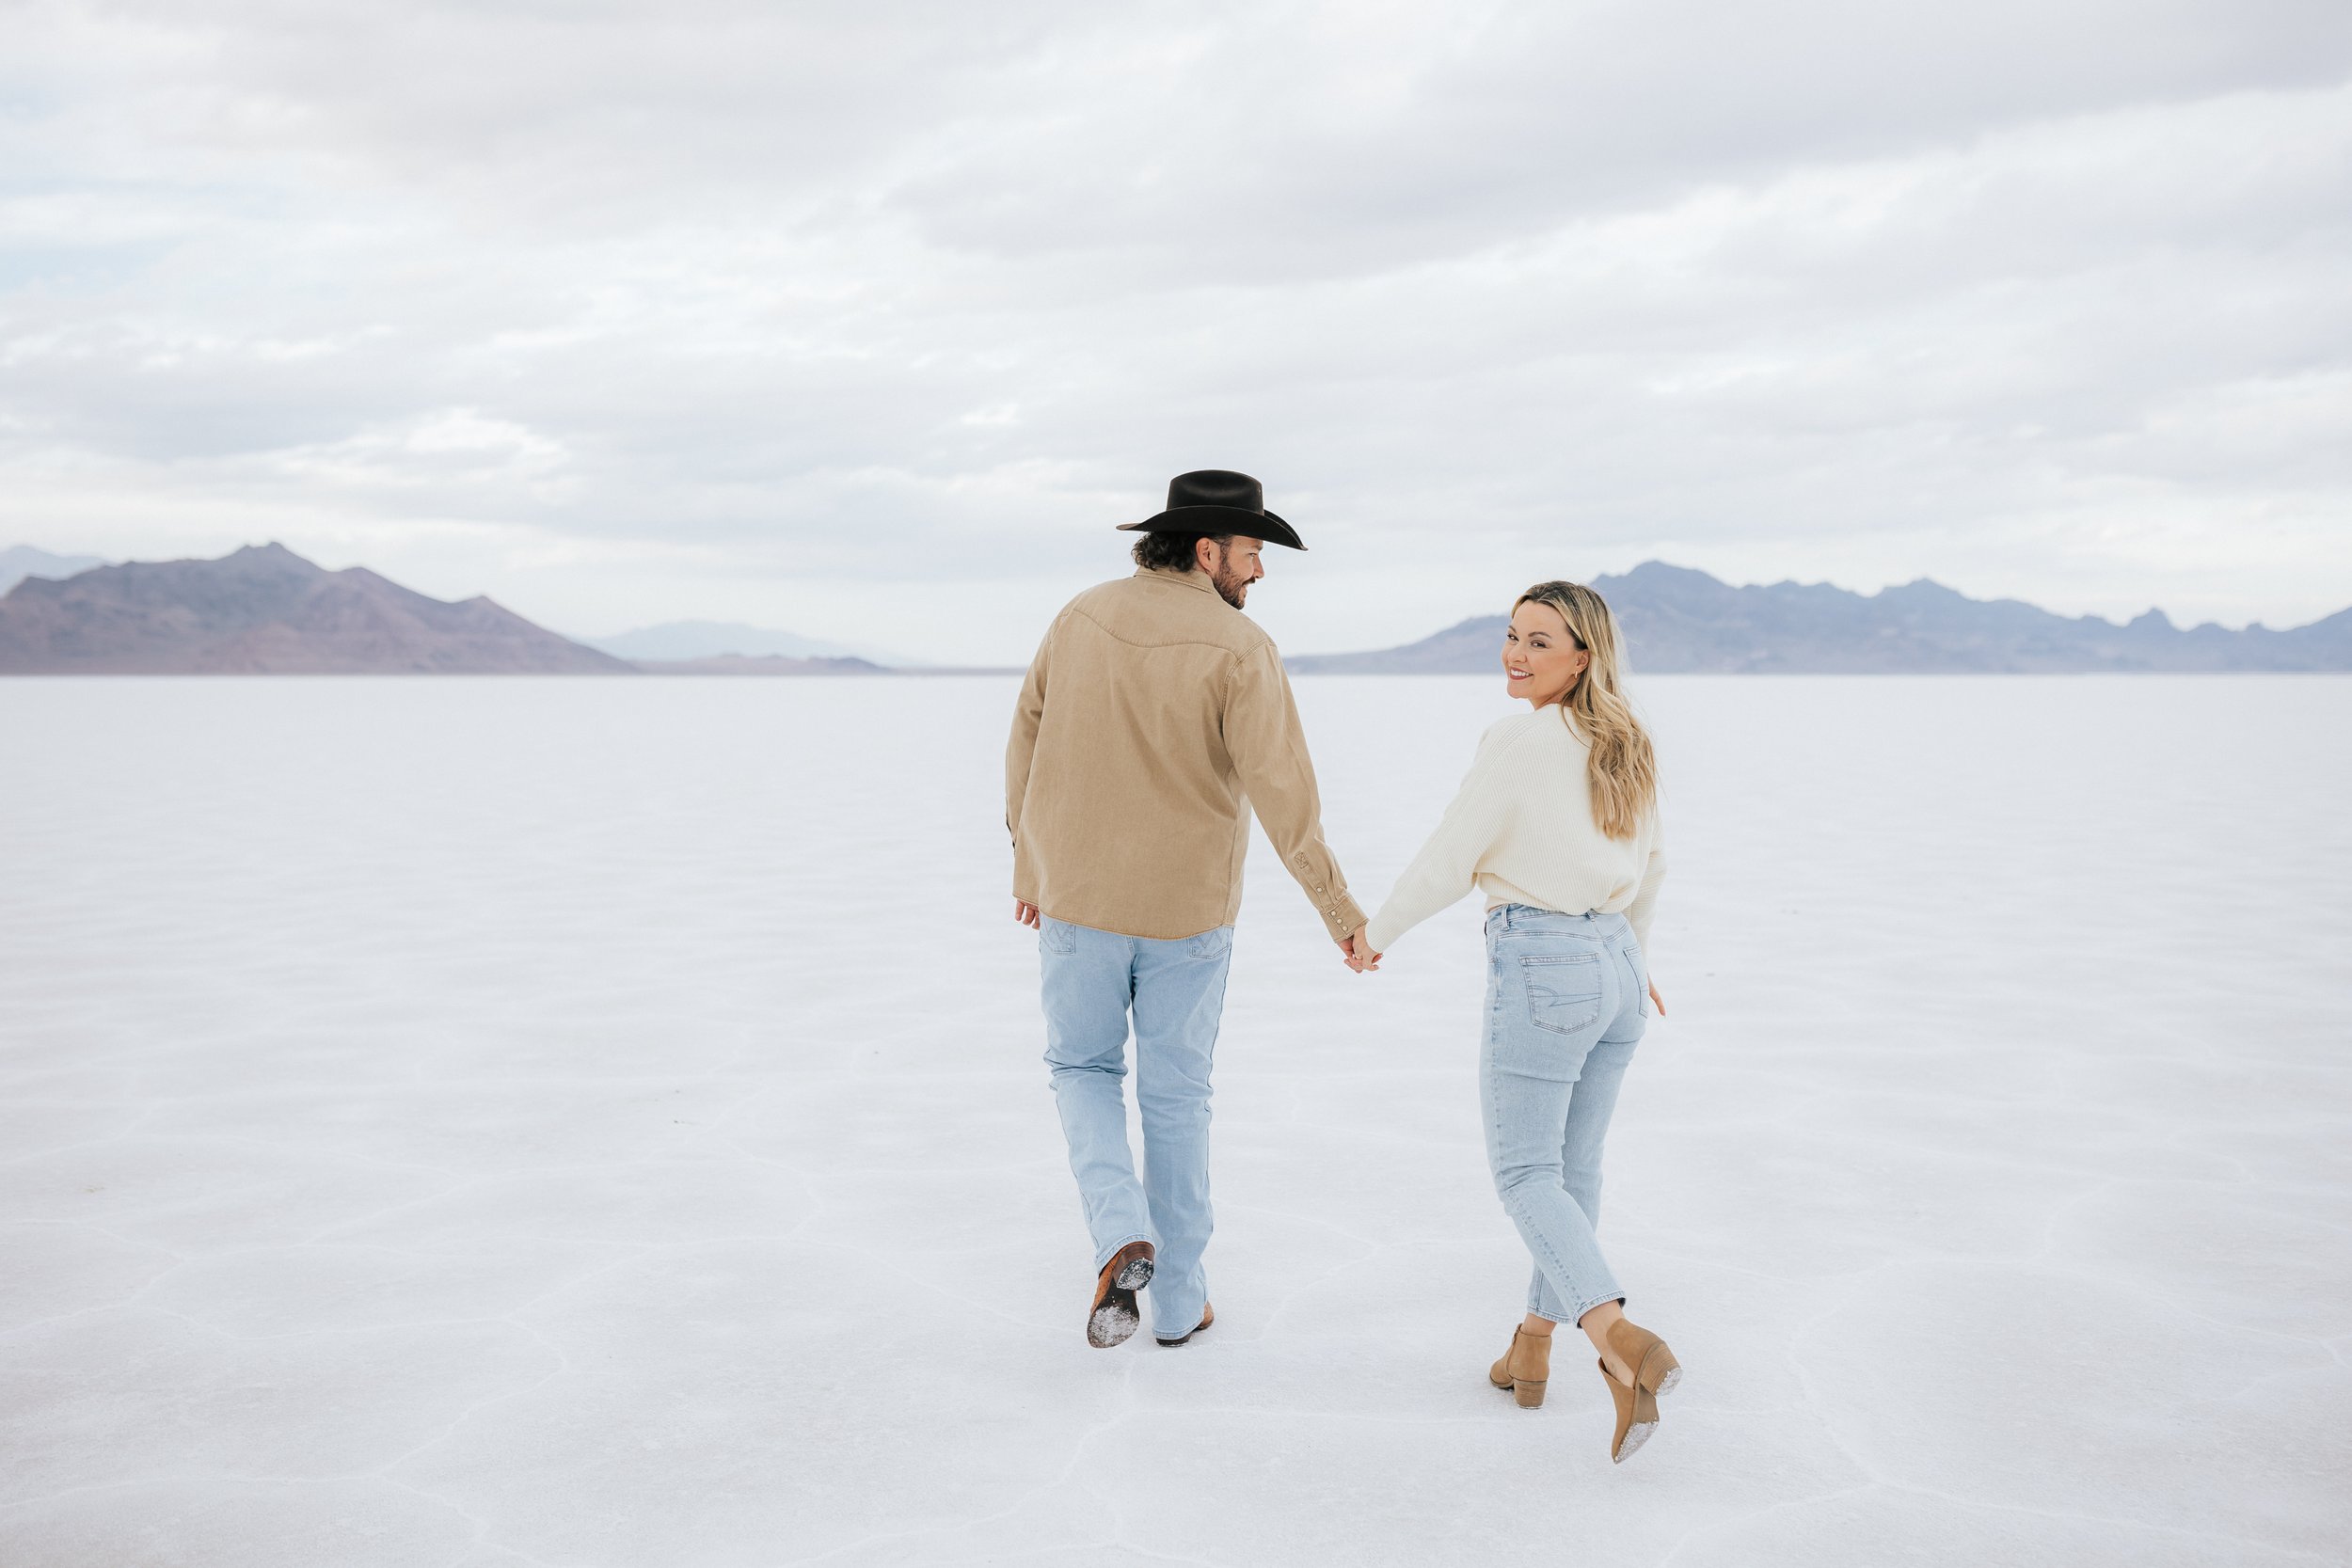   Photo of an engaged couple as they kiss and hug at the Bonneville Salt Flats near Wendover, Nevada and Salt Lake City, Utah. Cowboy and his girl walk together holding hands. The Salt Flats are white and the sky is overcast. The mountains show behin